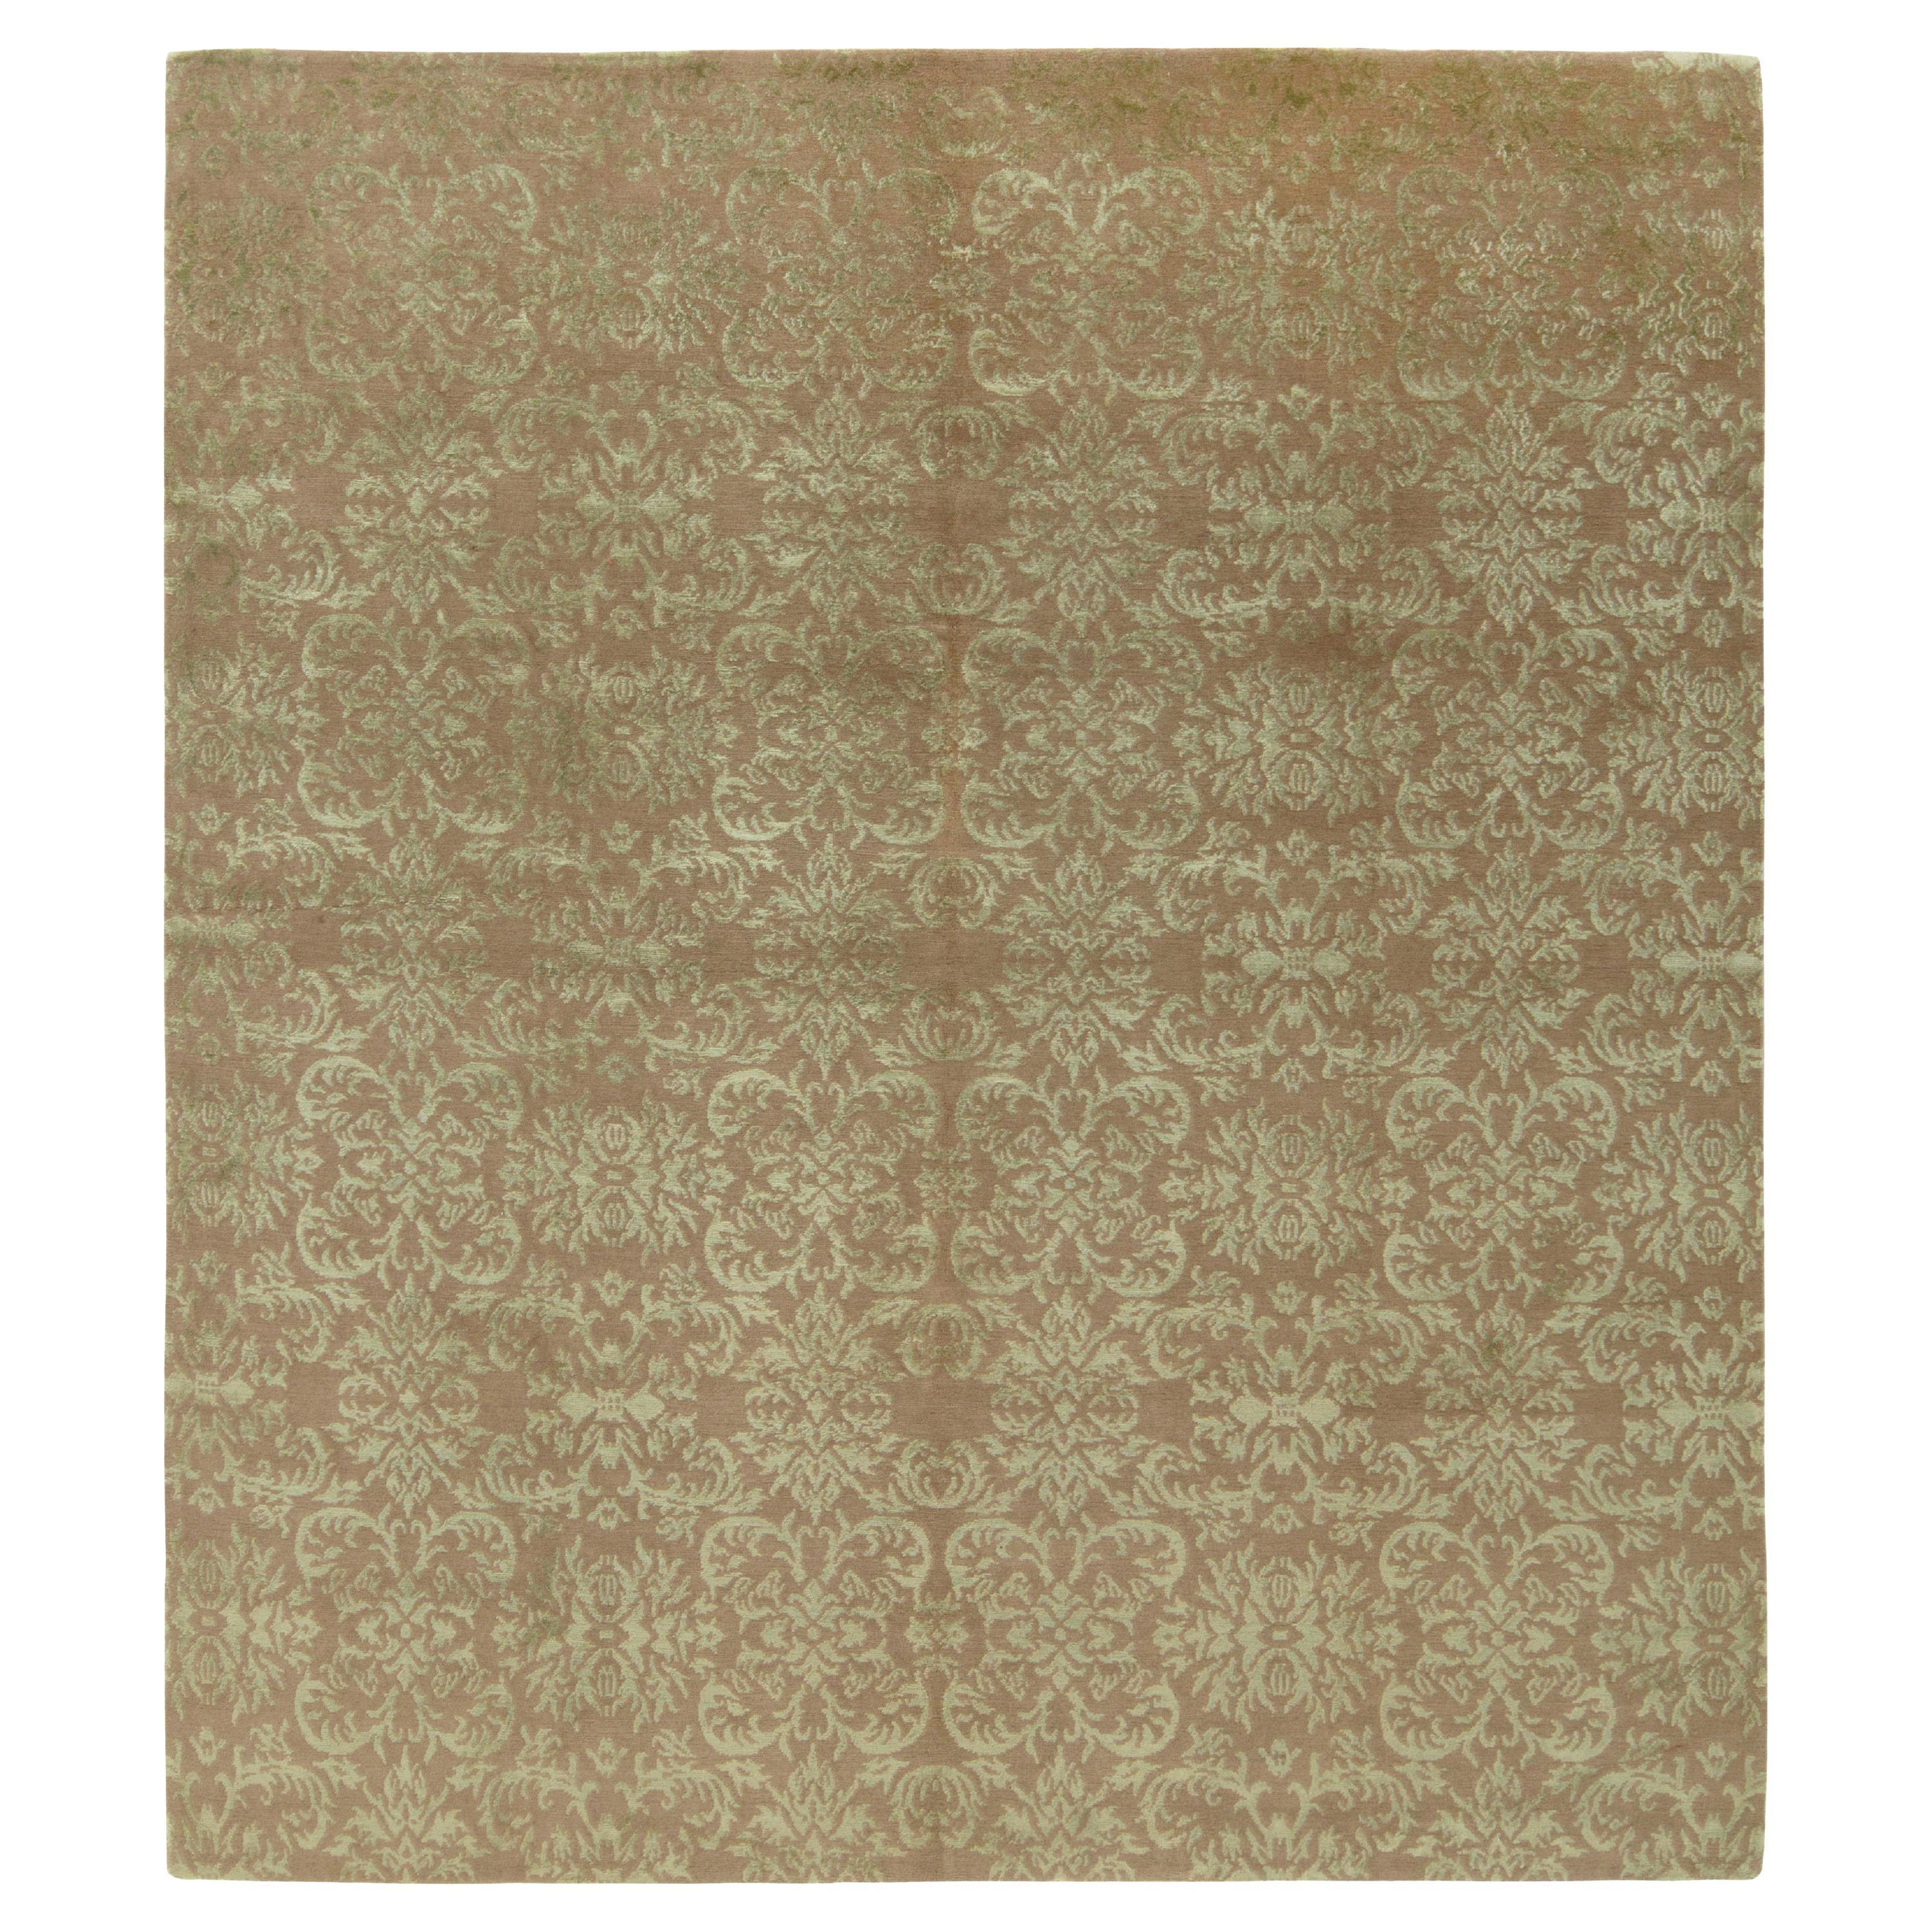 Rug & Kilim Handknotted Classic European Style Rug in Beige Brown Floral Pattern